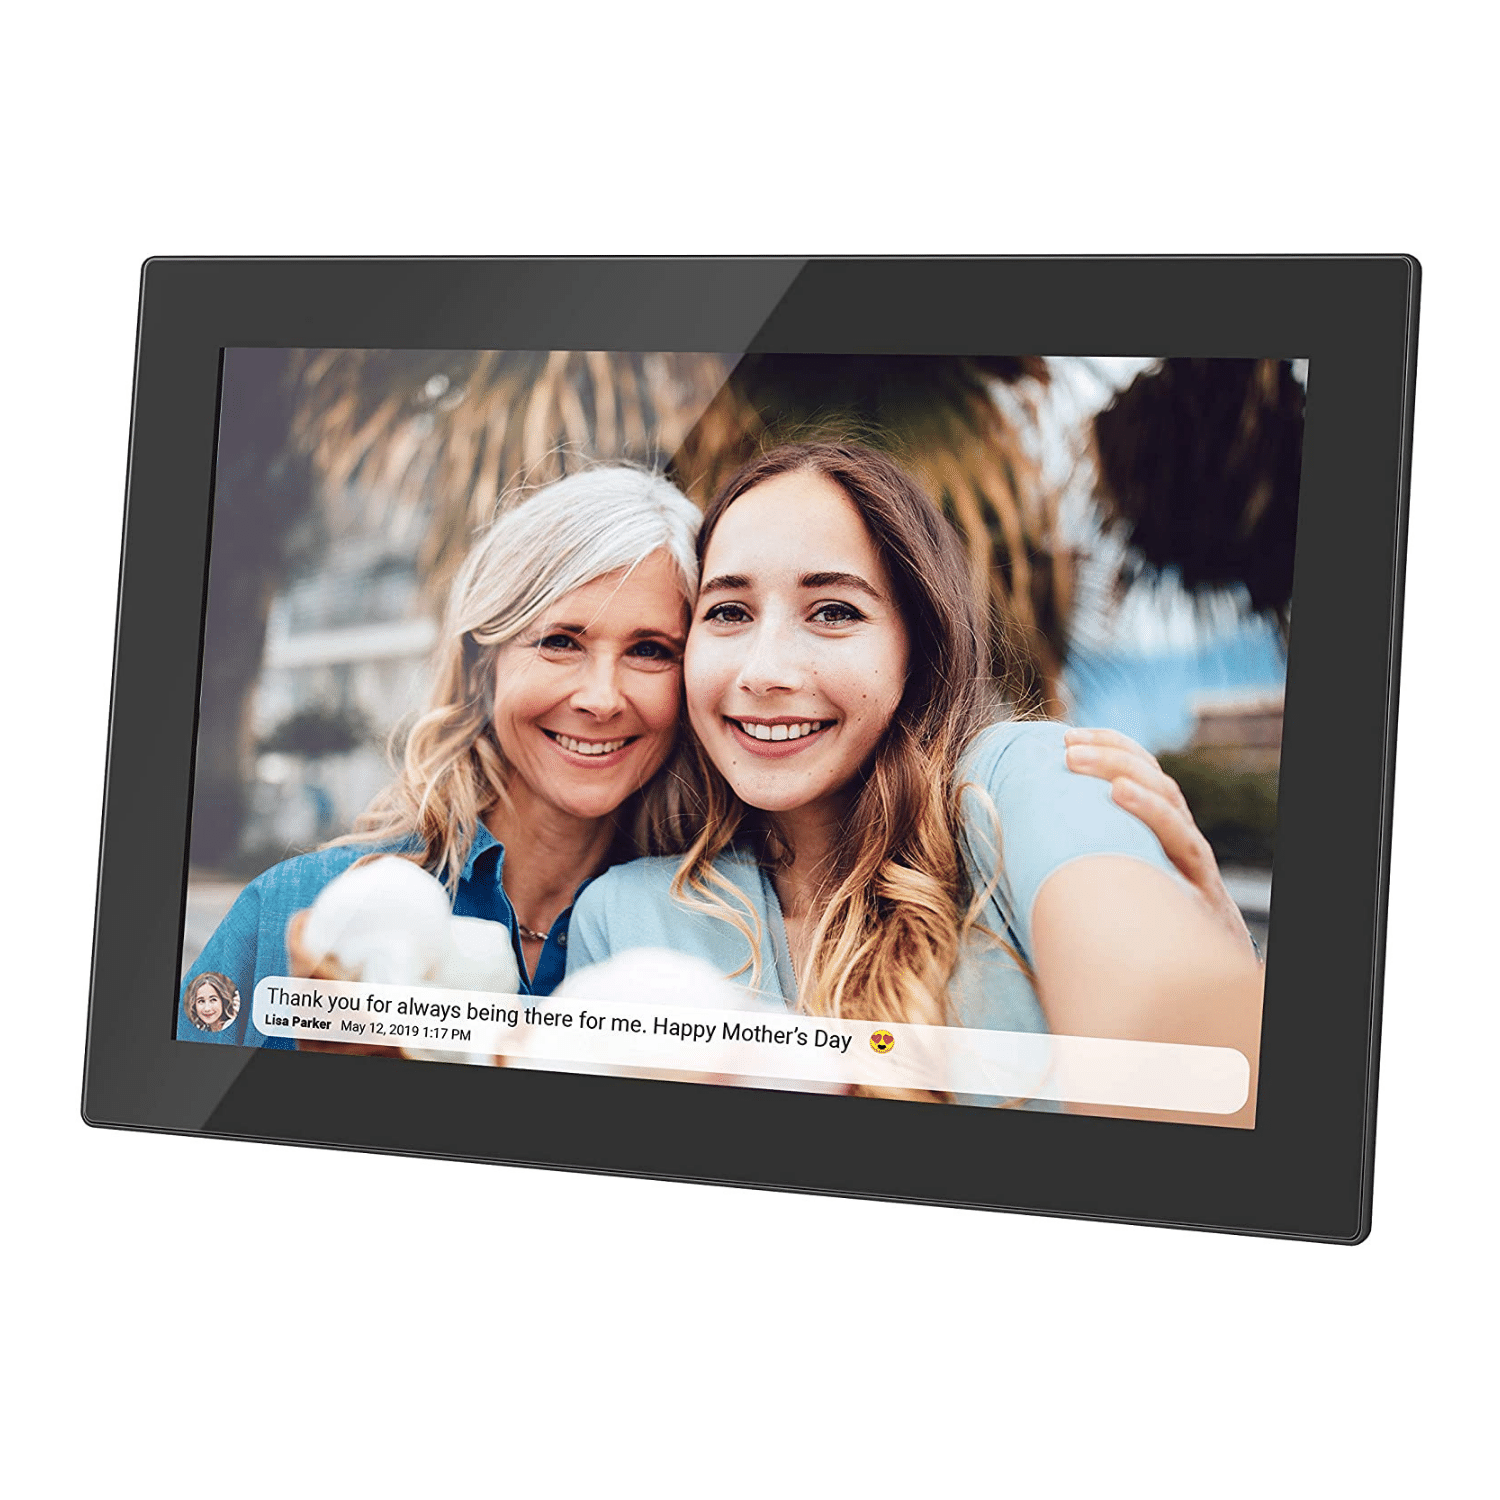 Feelcare 10 Inch 16GB Send Photos Or Videos Digital WiFi Picture Frame